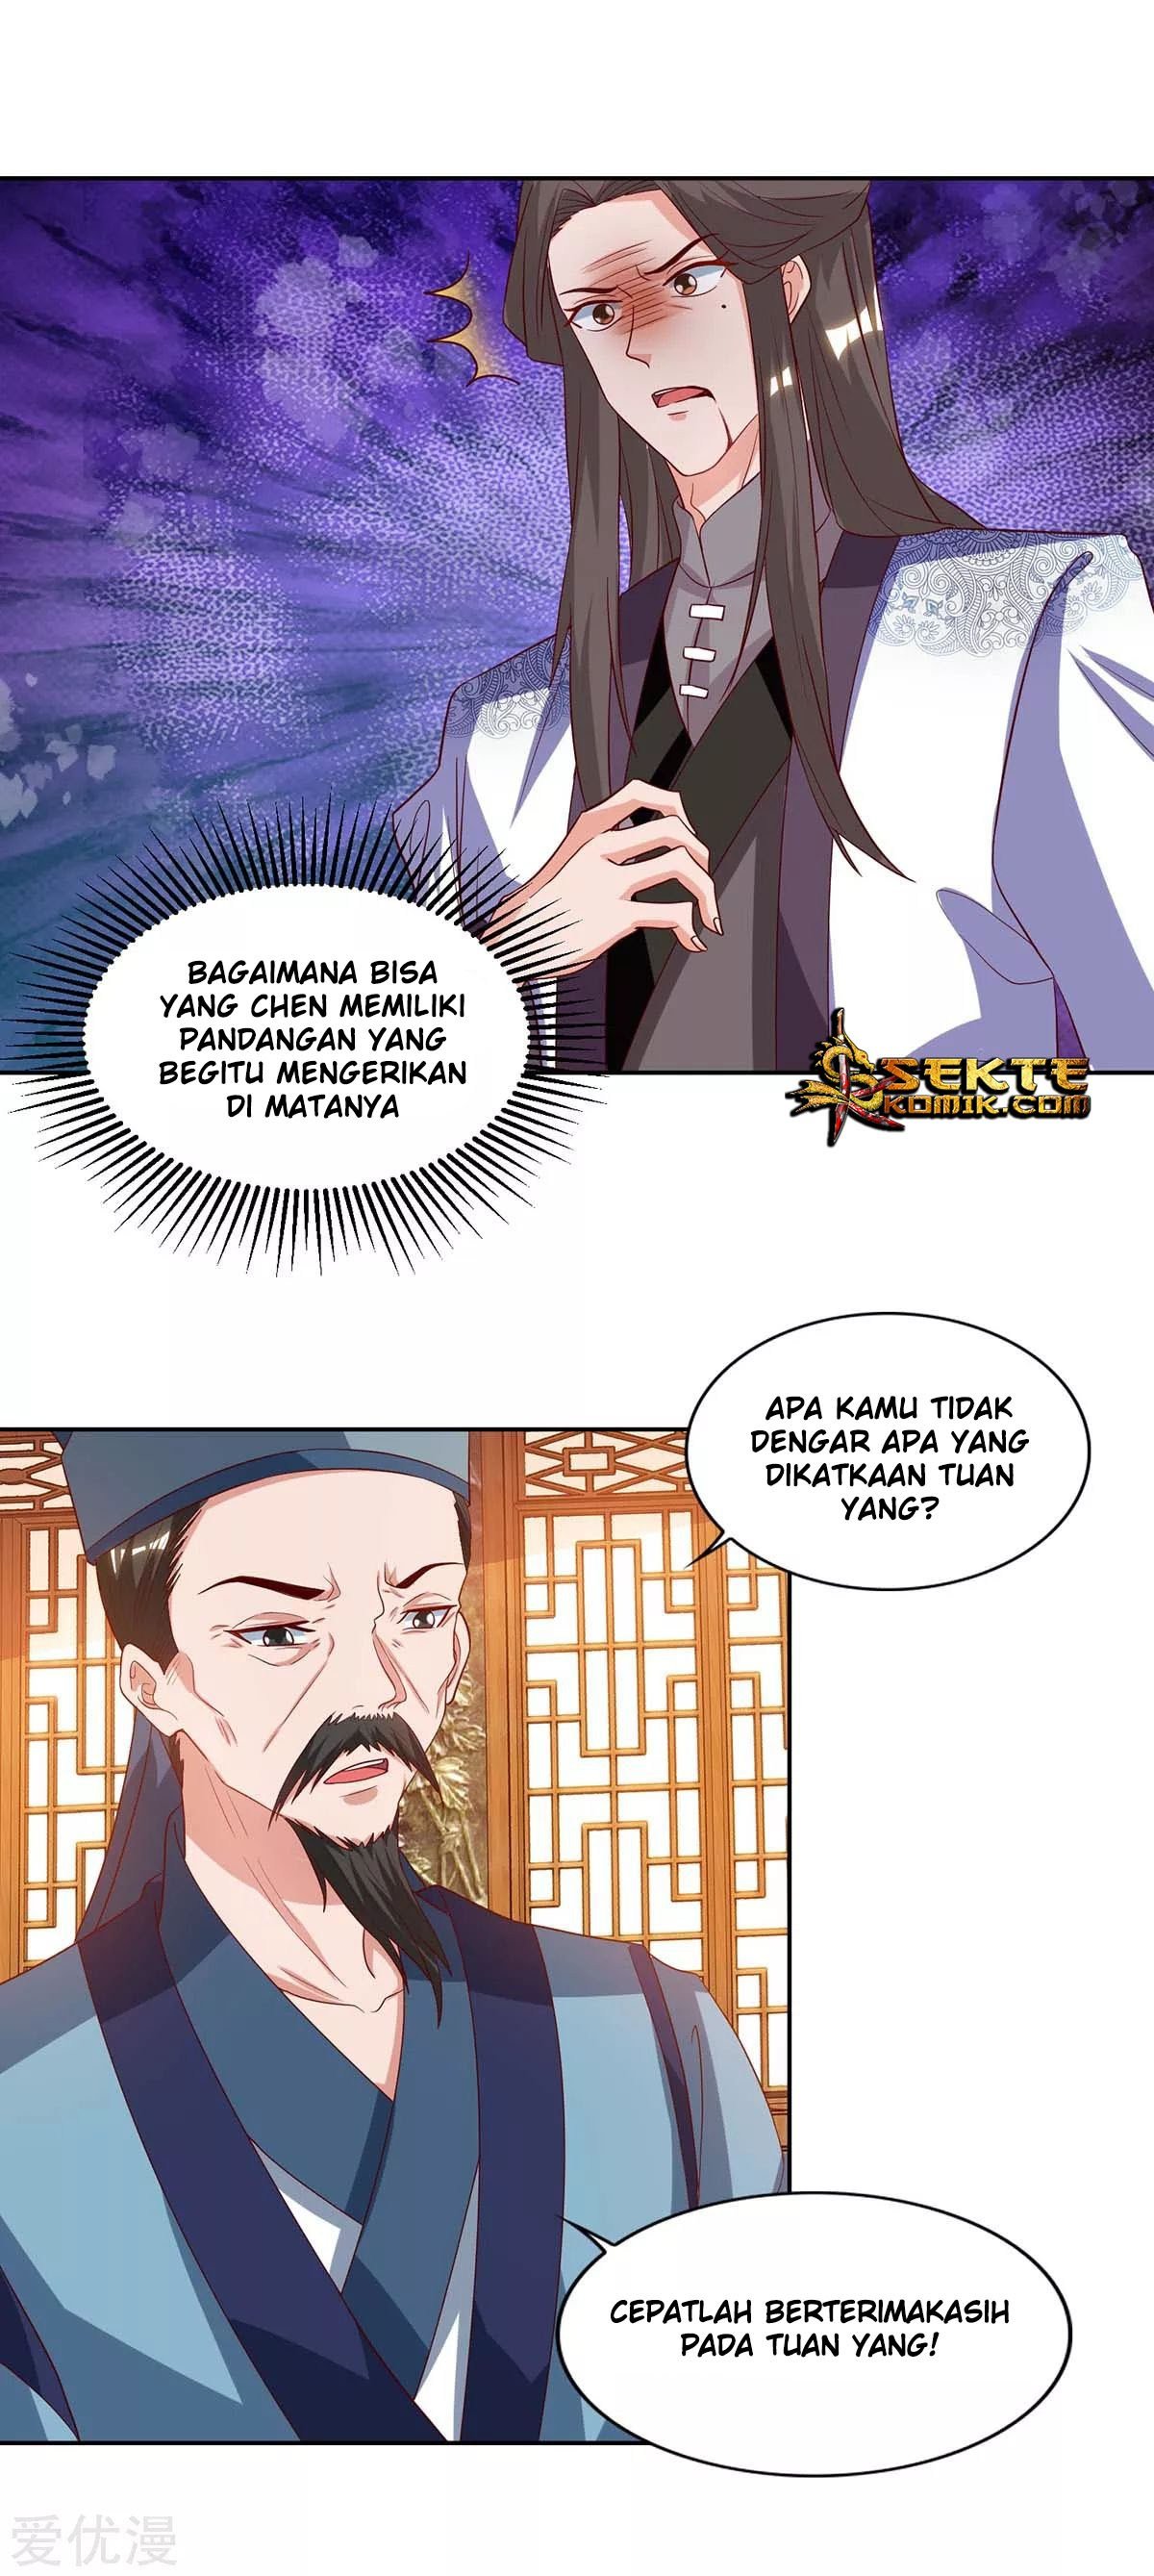 Rebirth After 80.000 Years Passed Chapter 95